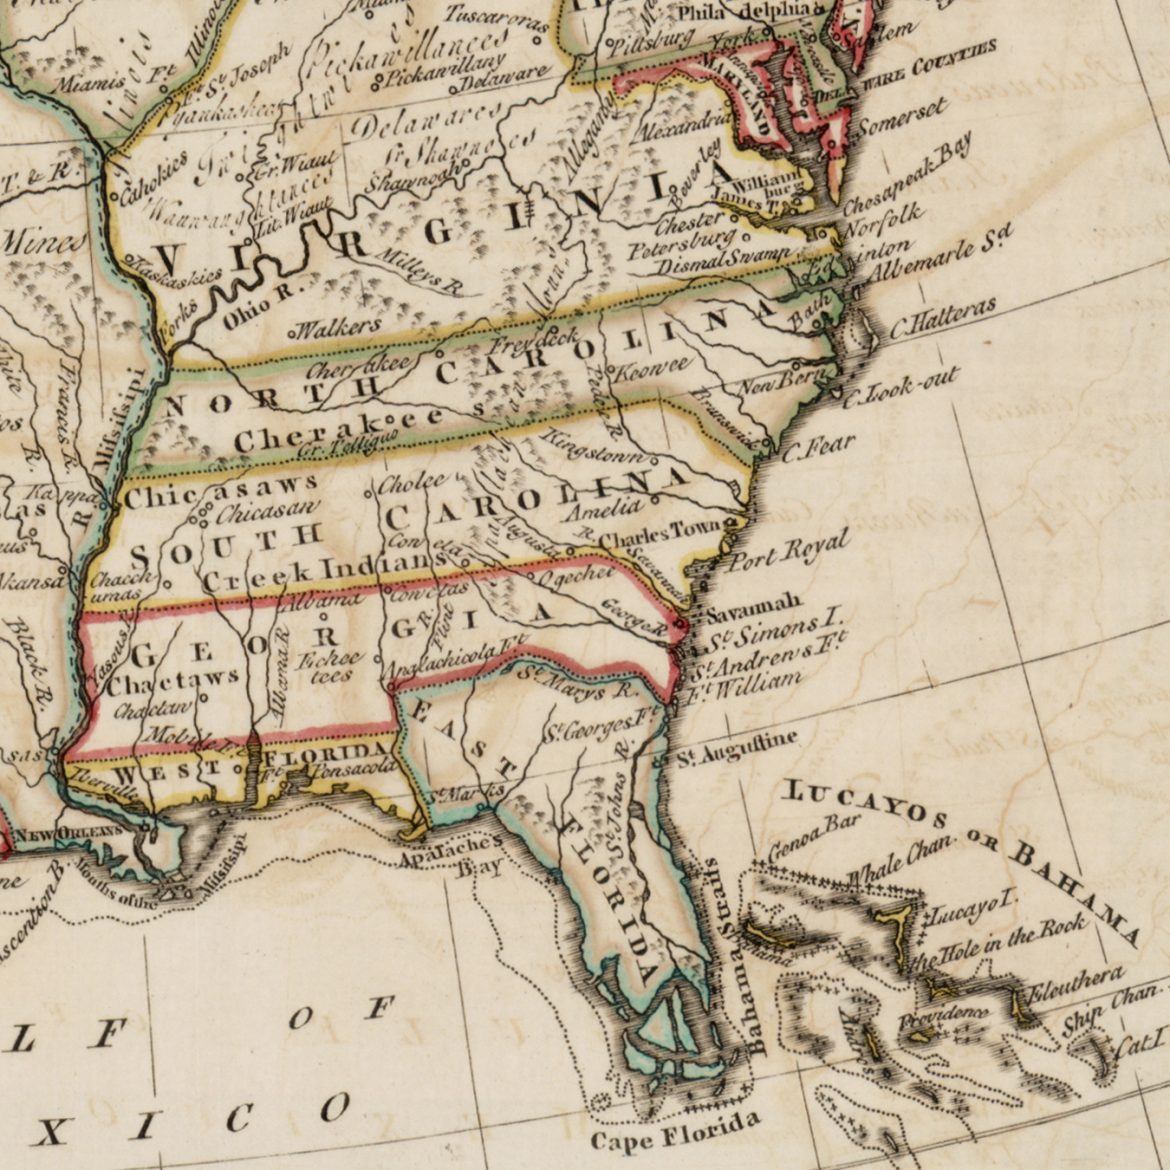 Life in the Southern Colonies (part 3 of 3) Journal of the American